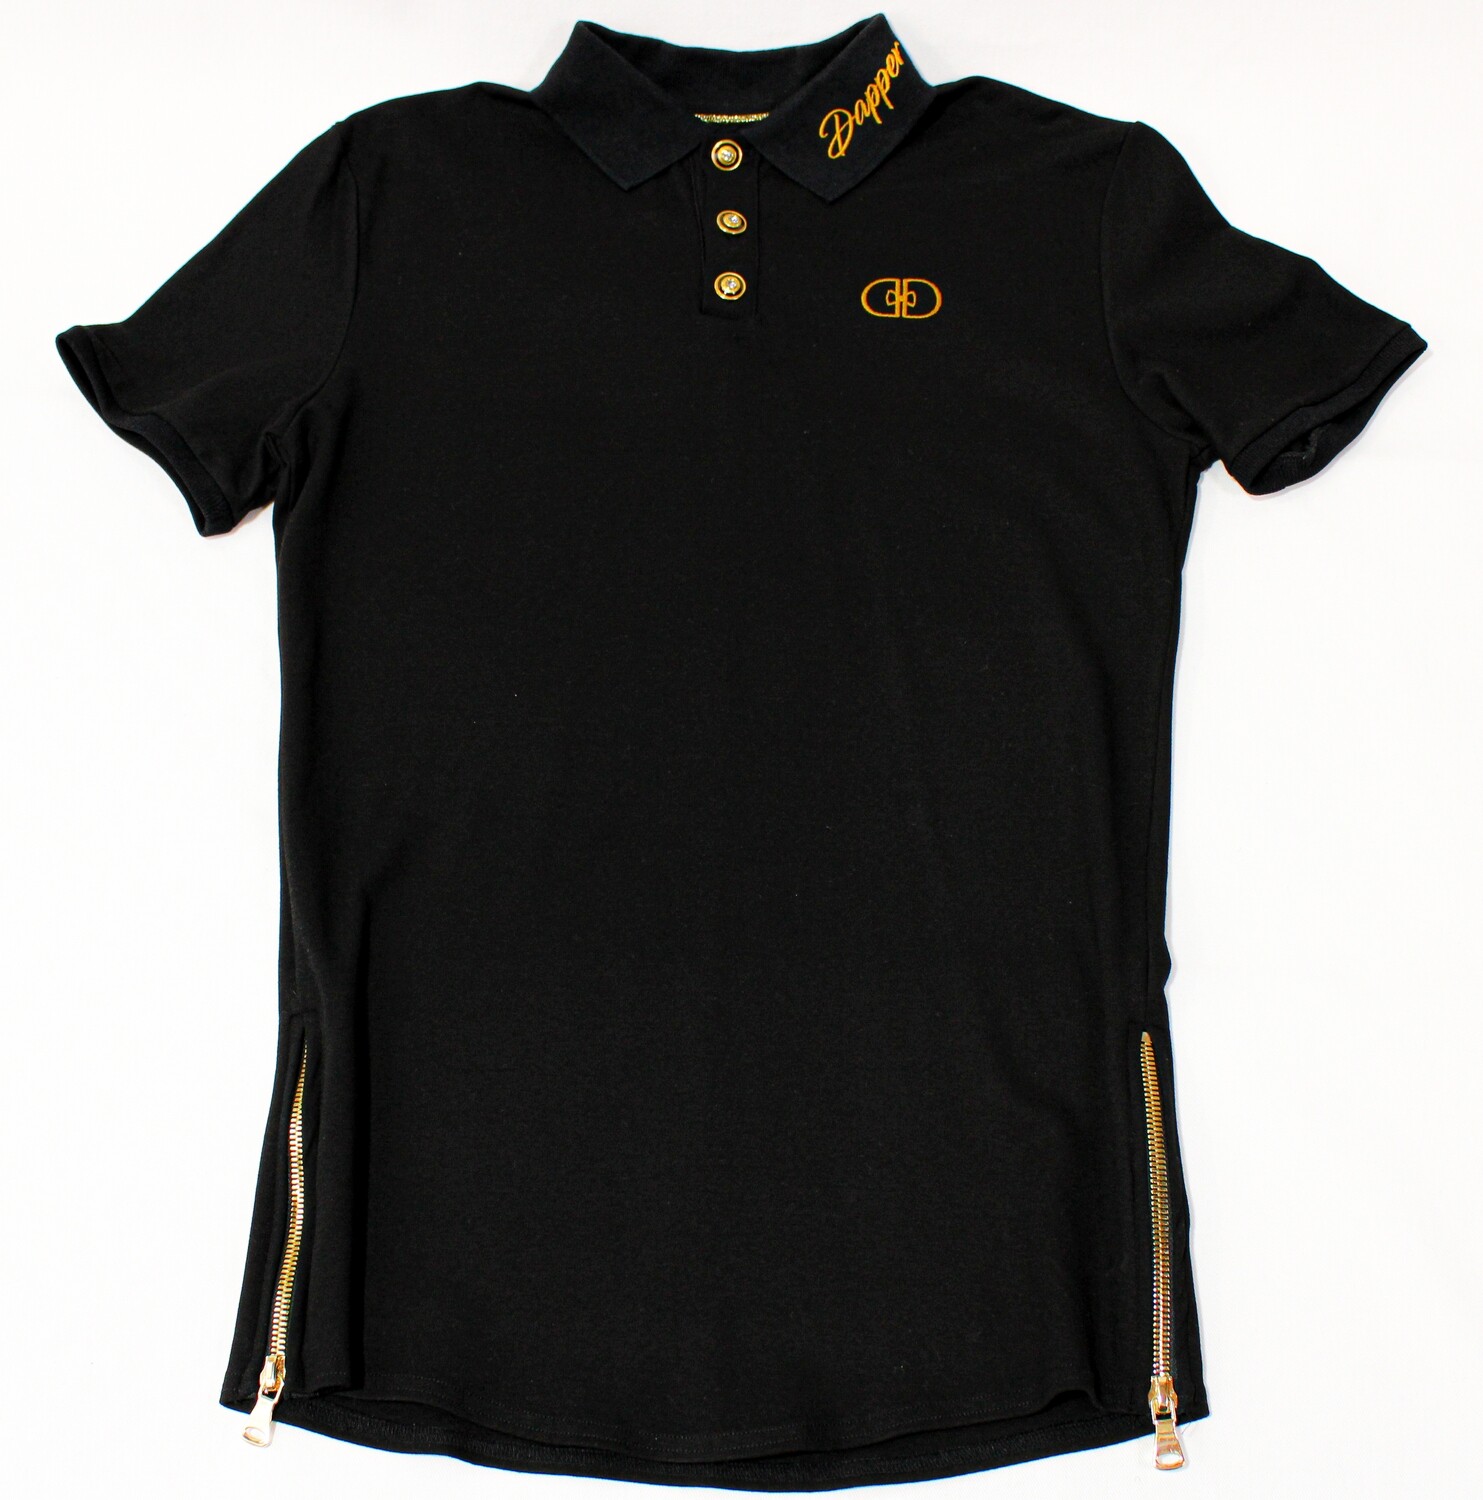 "Luxxe" Polo in black/gold